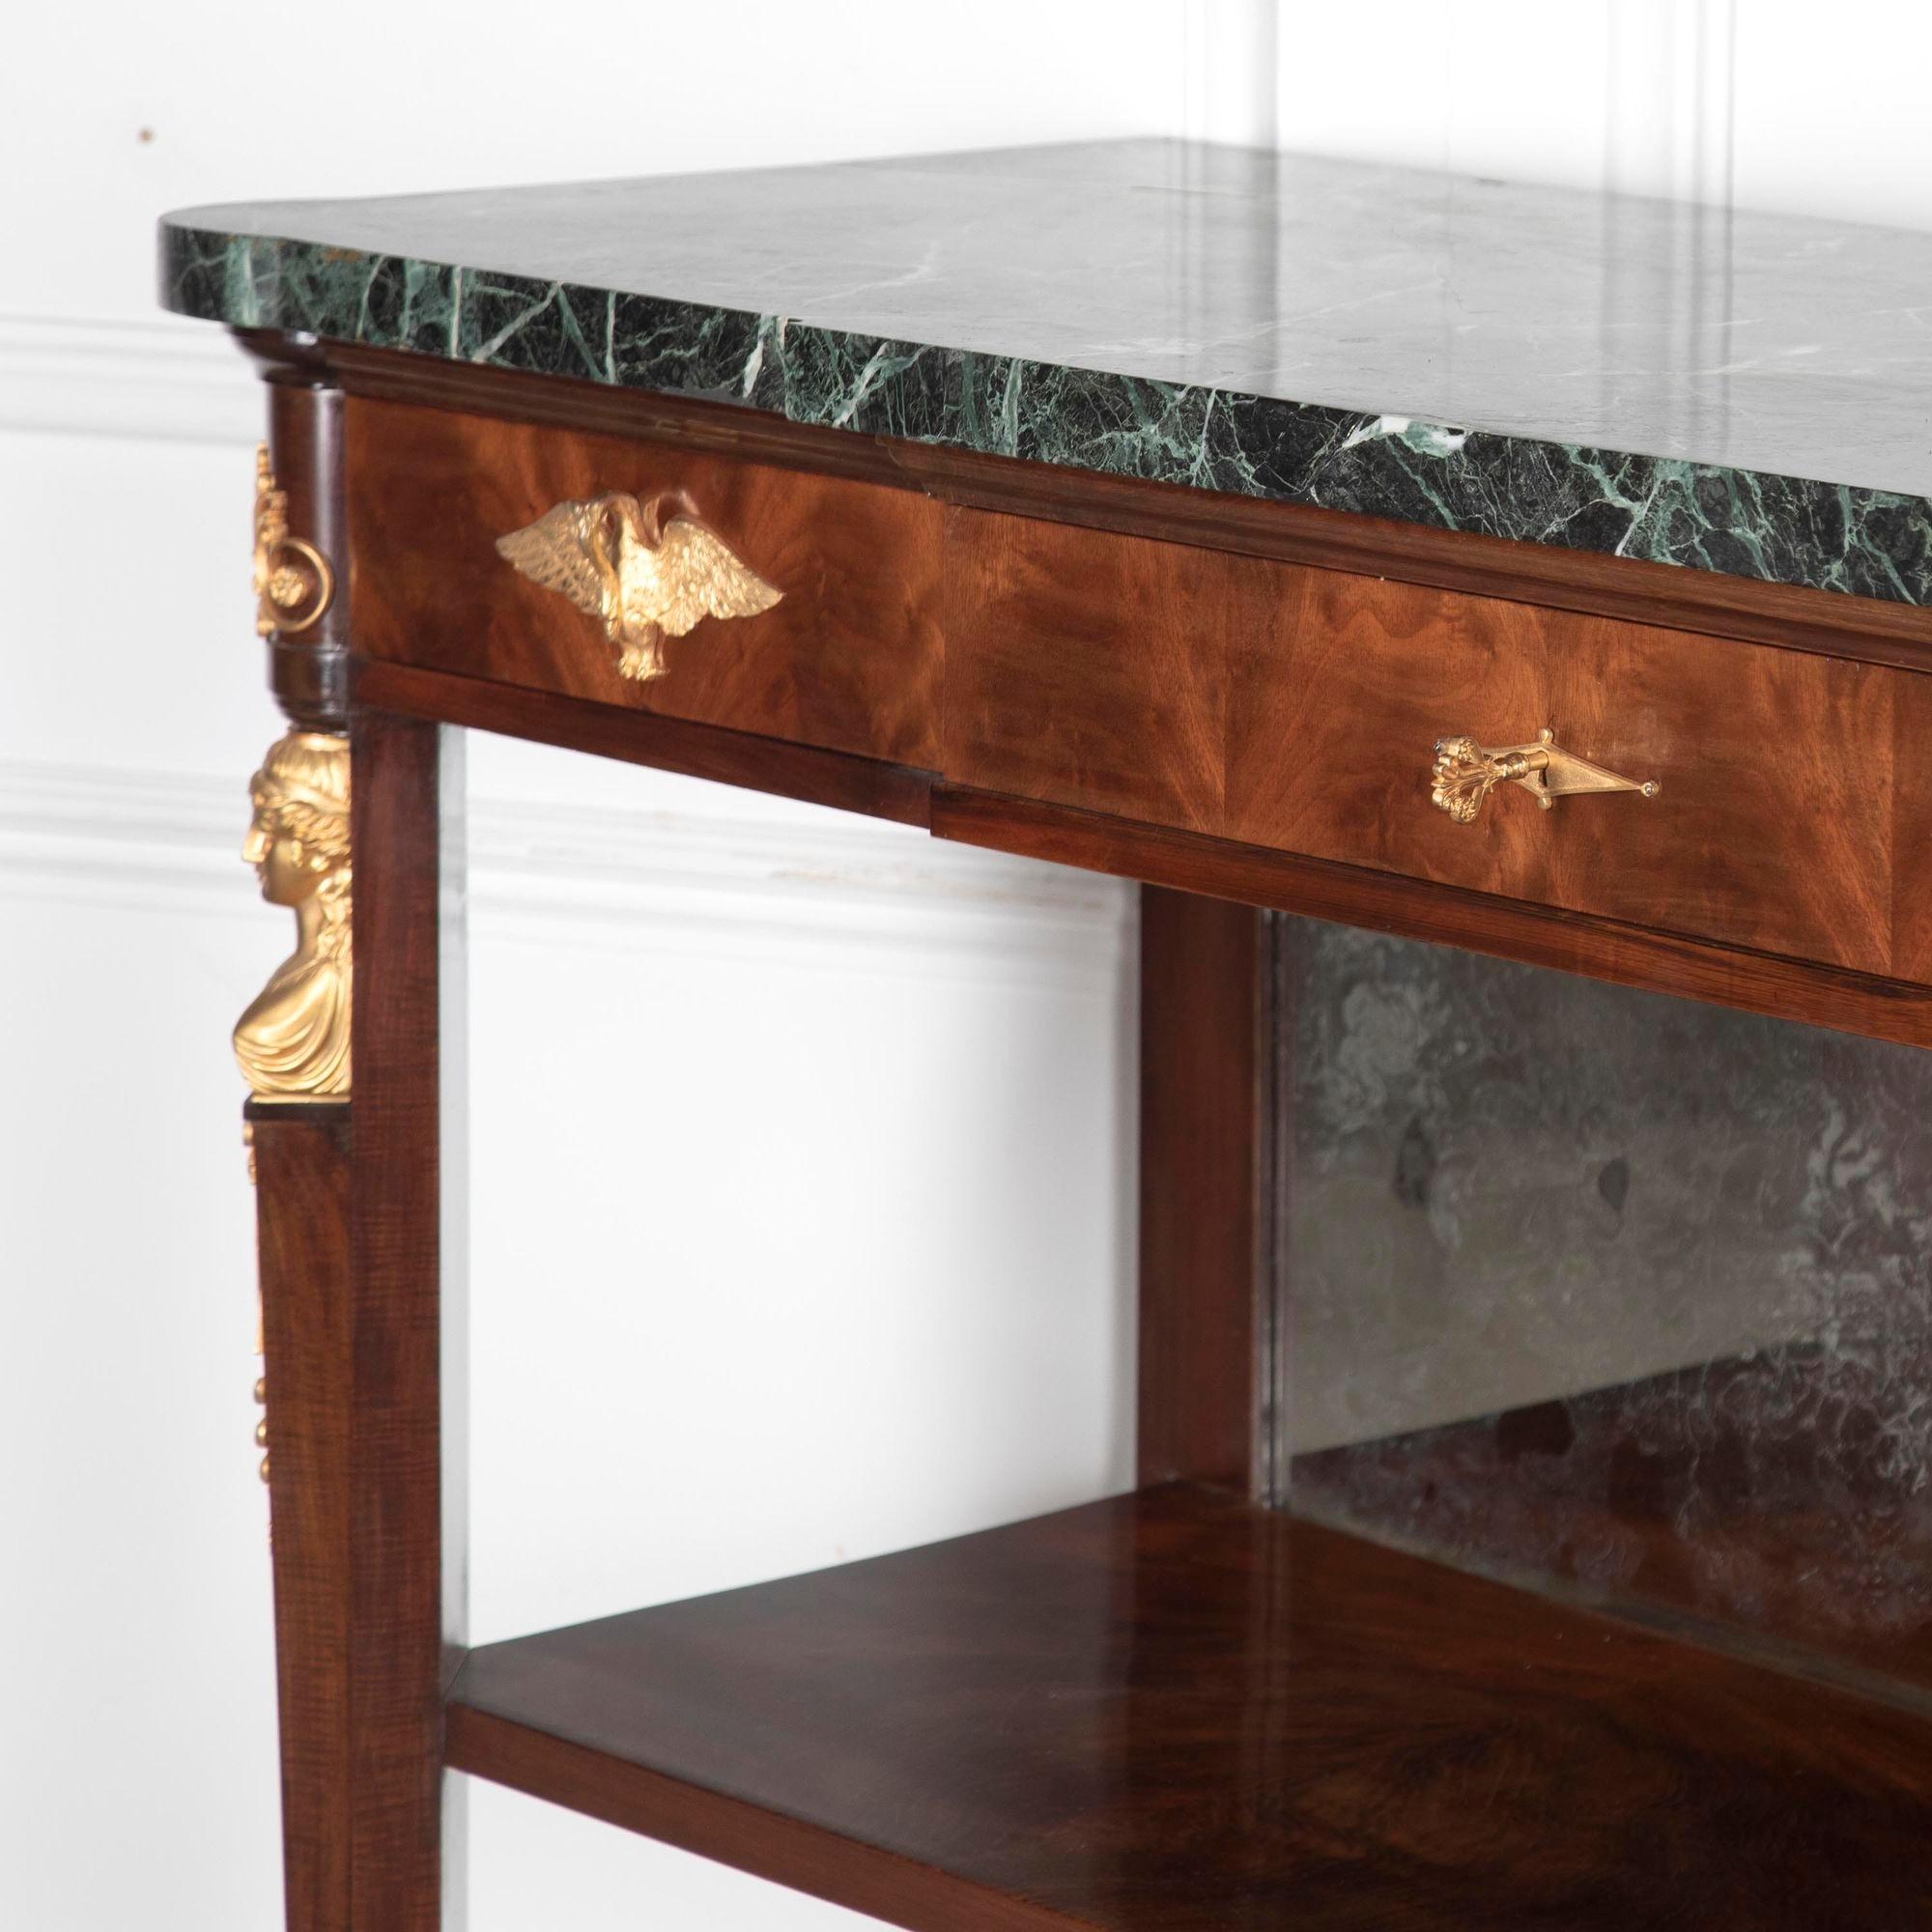 Very best quality Empire 19th century buffet.
This superb piece features gilt bronze mounts and gilt bronze feet. With a marble top featuring three drawers across the top and a very attractive veined green marble. Also features a mirror back to the